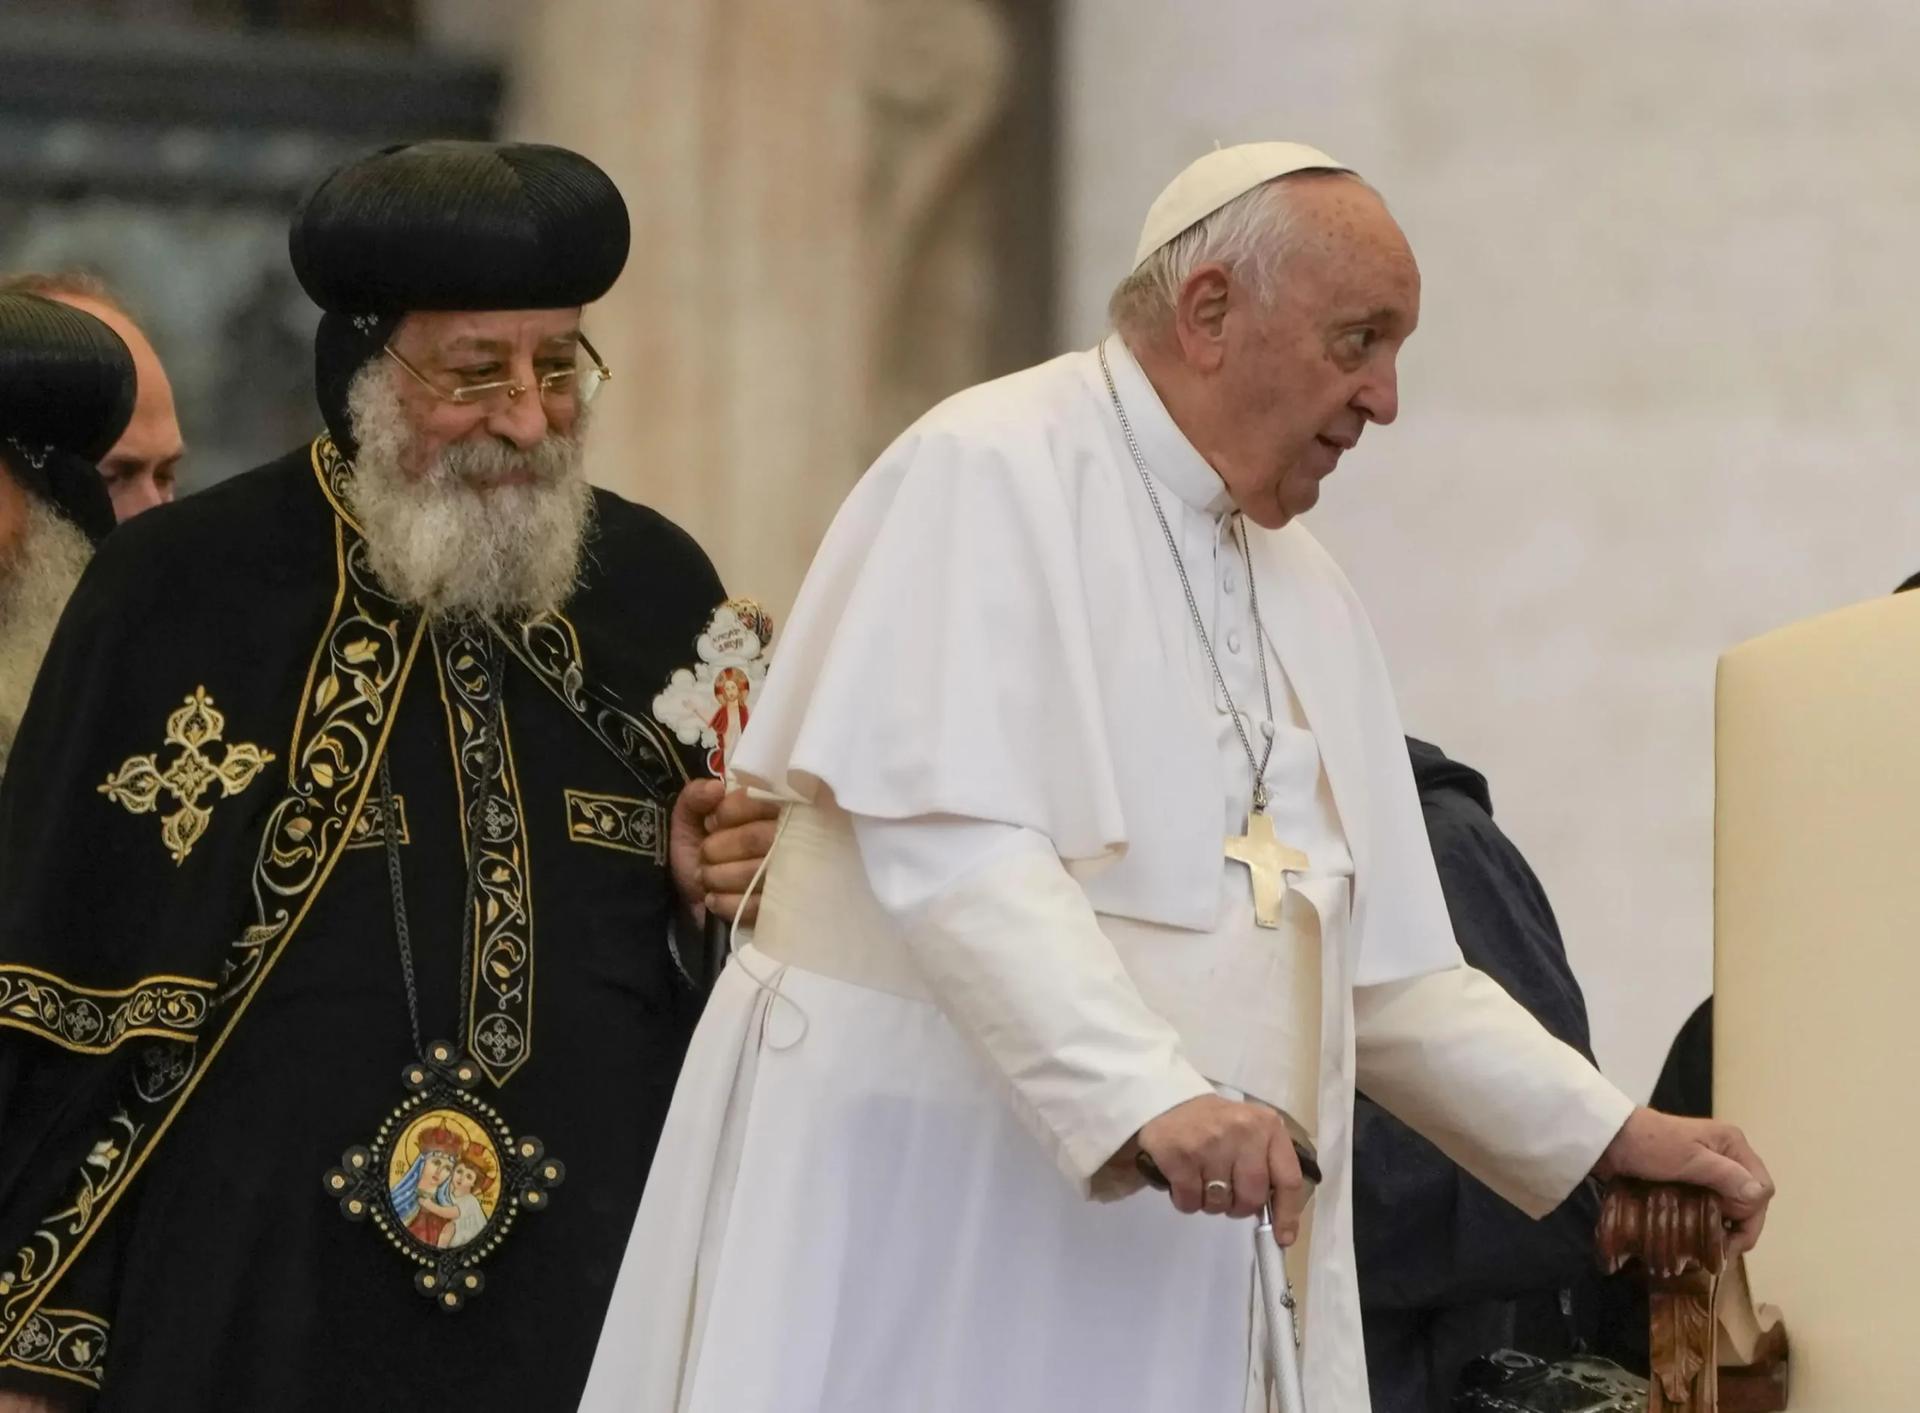 Coptic Church cuts theological dialogue with Catholics; says blessing gays ‘unacceptable’